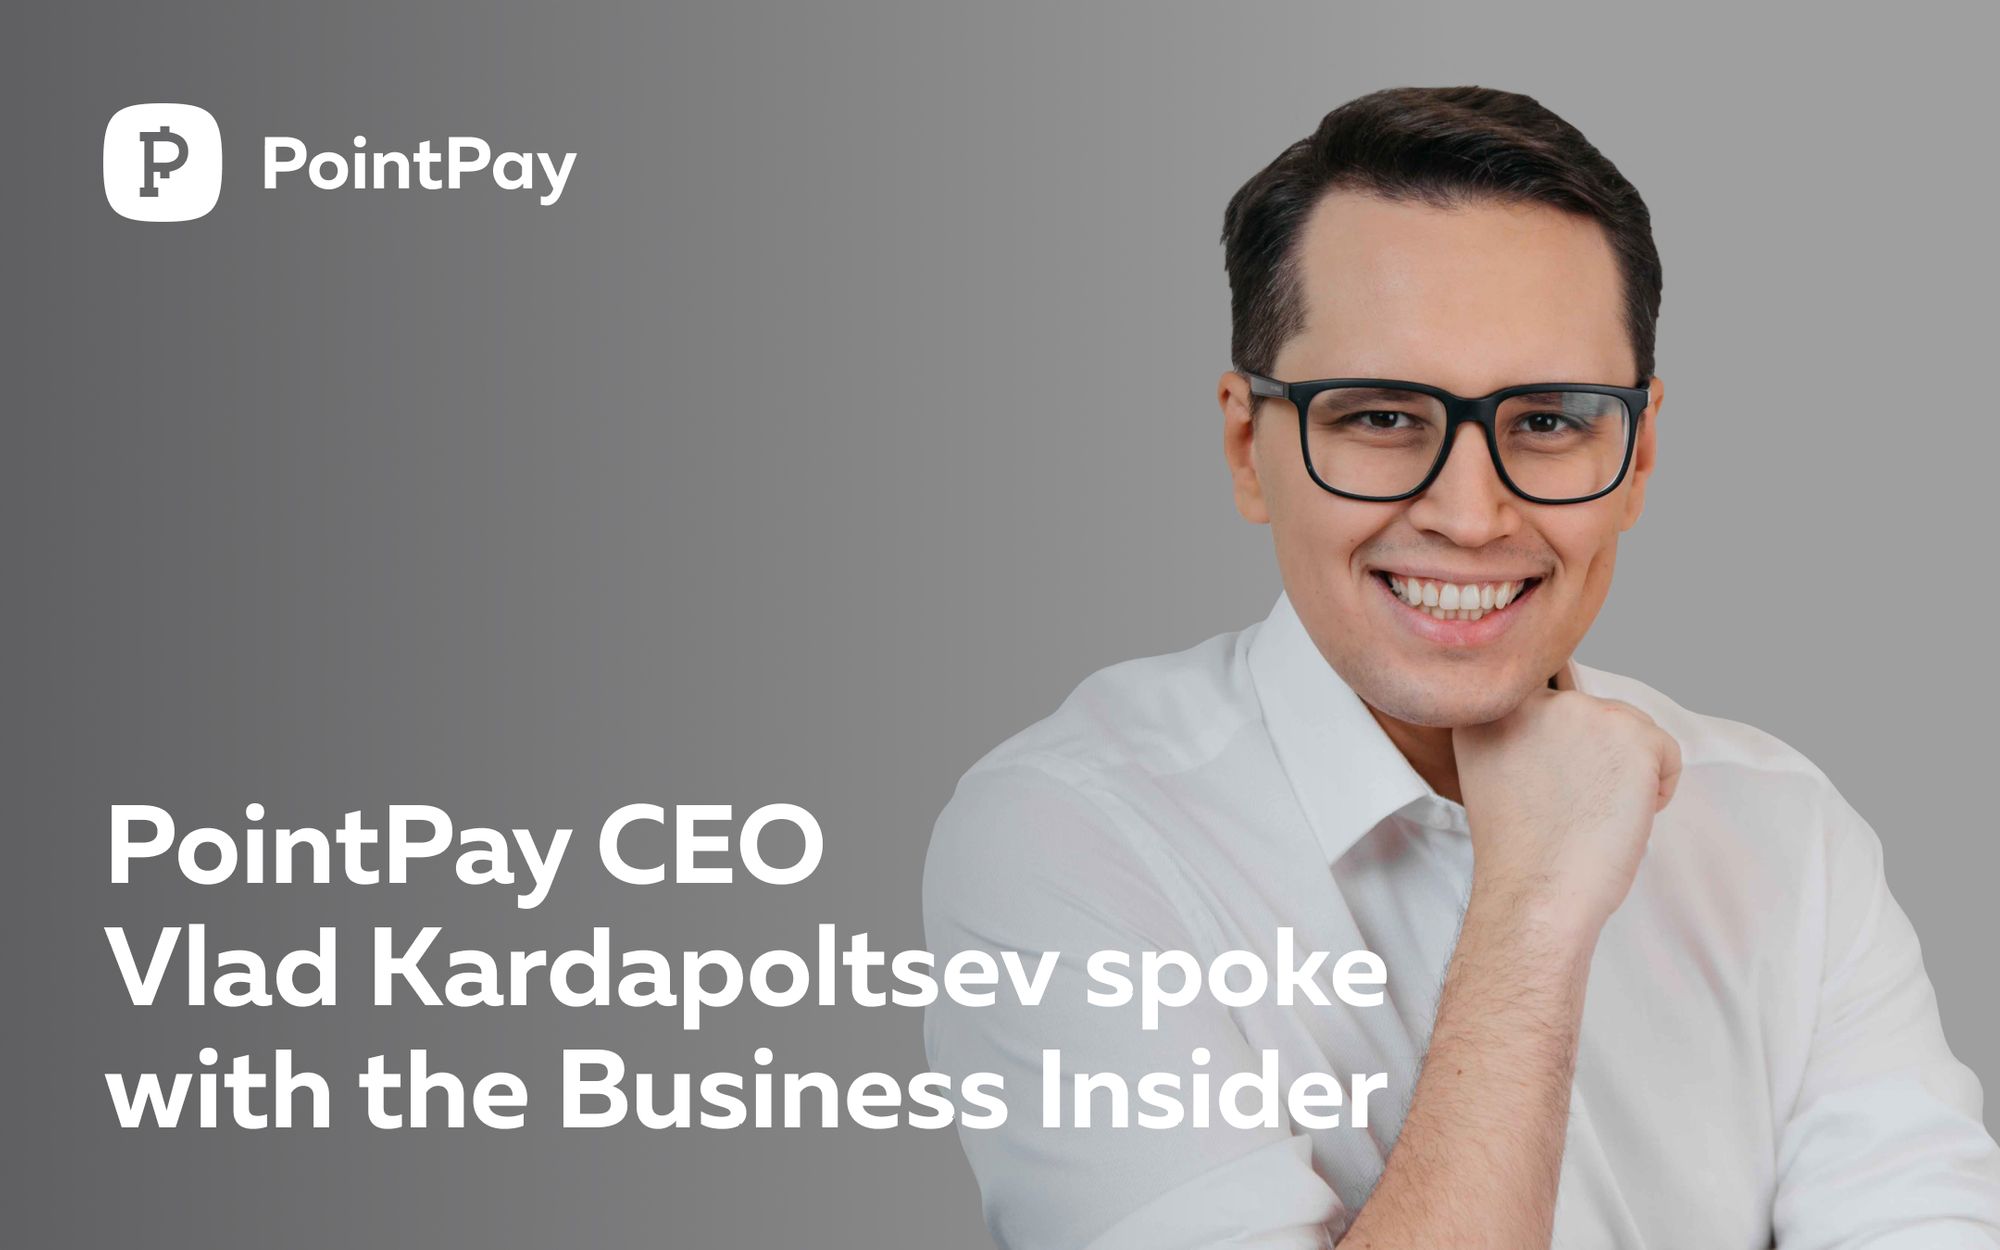 PointPay CEO — Vladimir Kardapoltsev spoke with the Business Insider